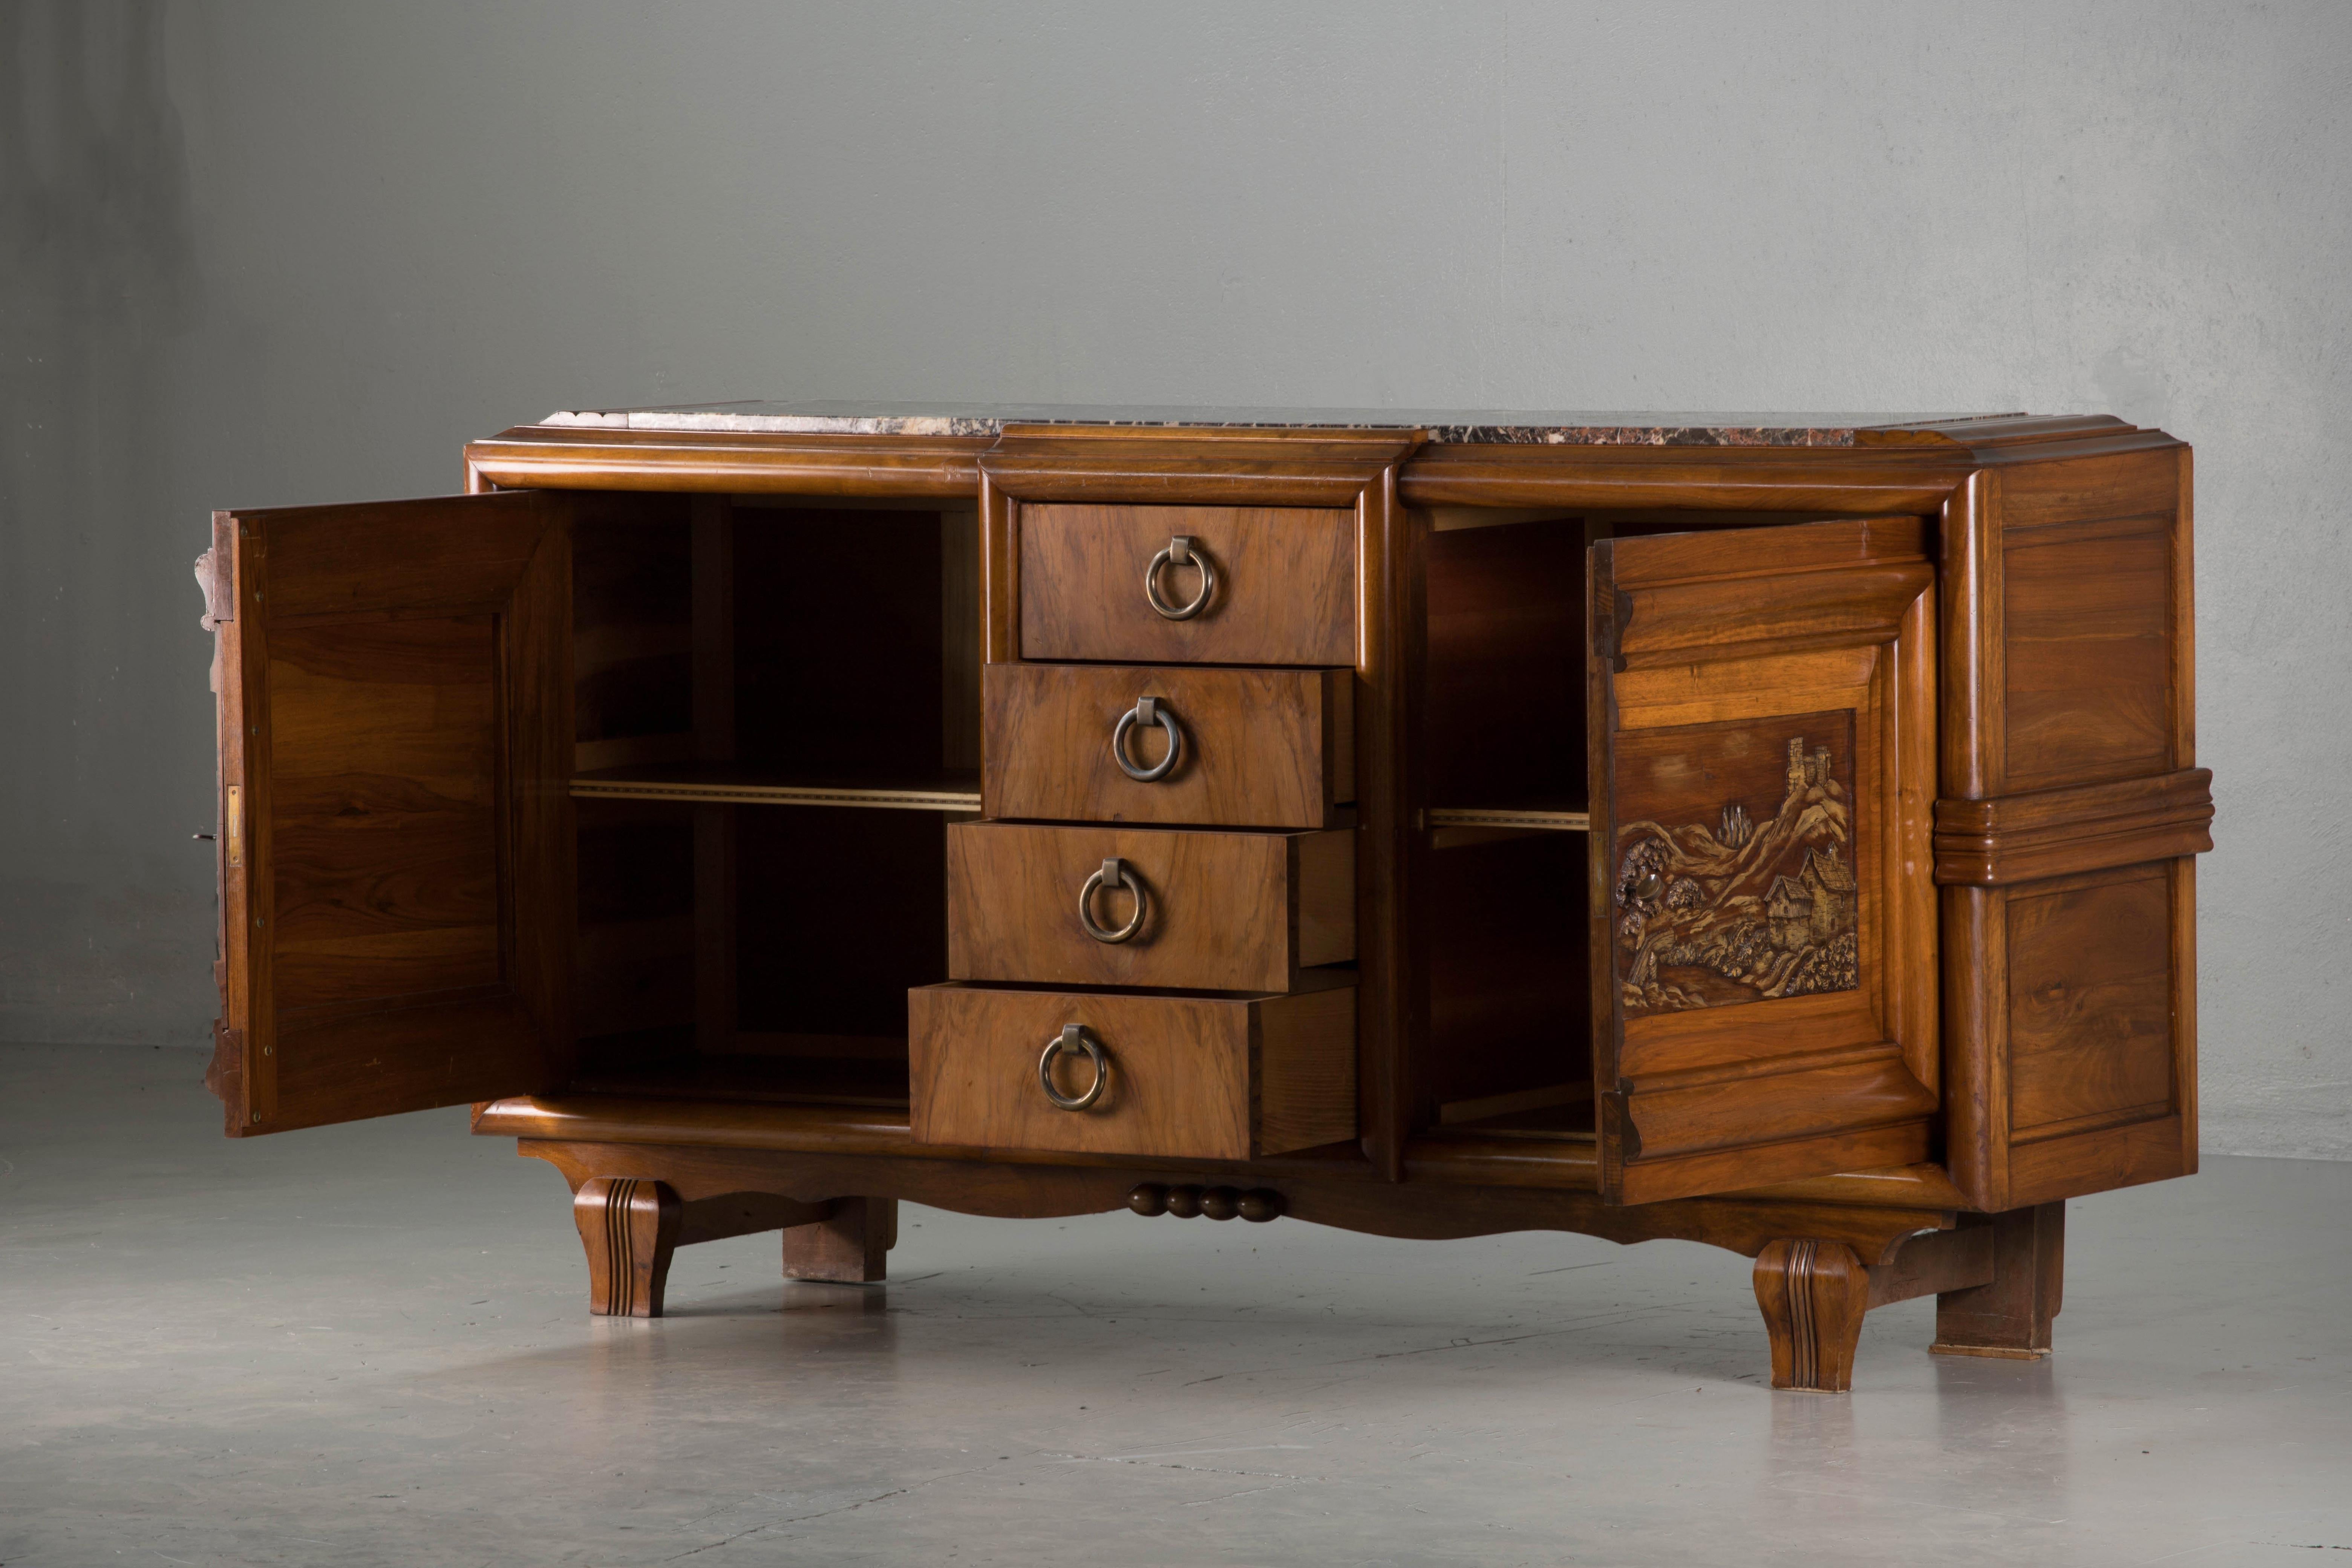 20th Century French Mahogany Art Deco Sideboard with Sculptural French Art, 1940s